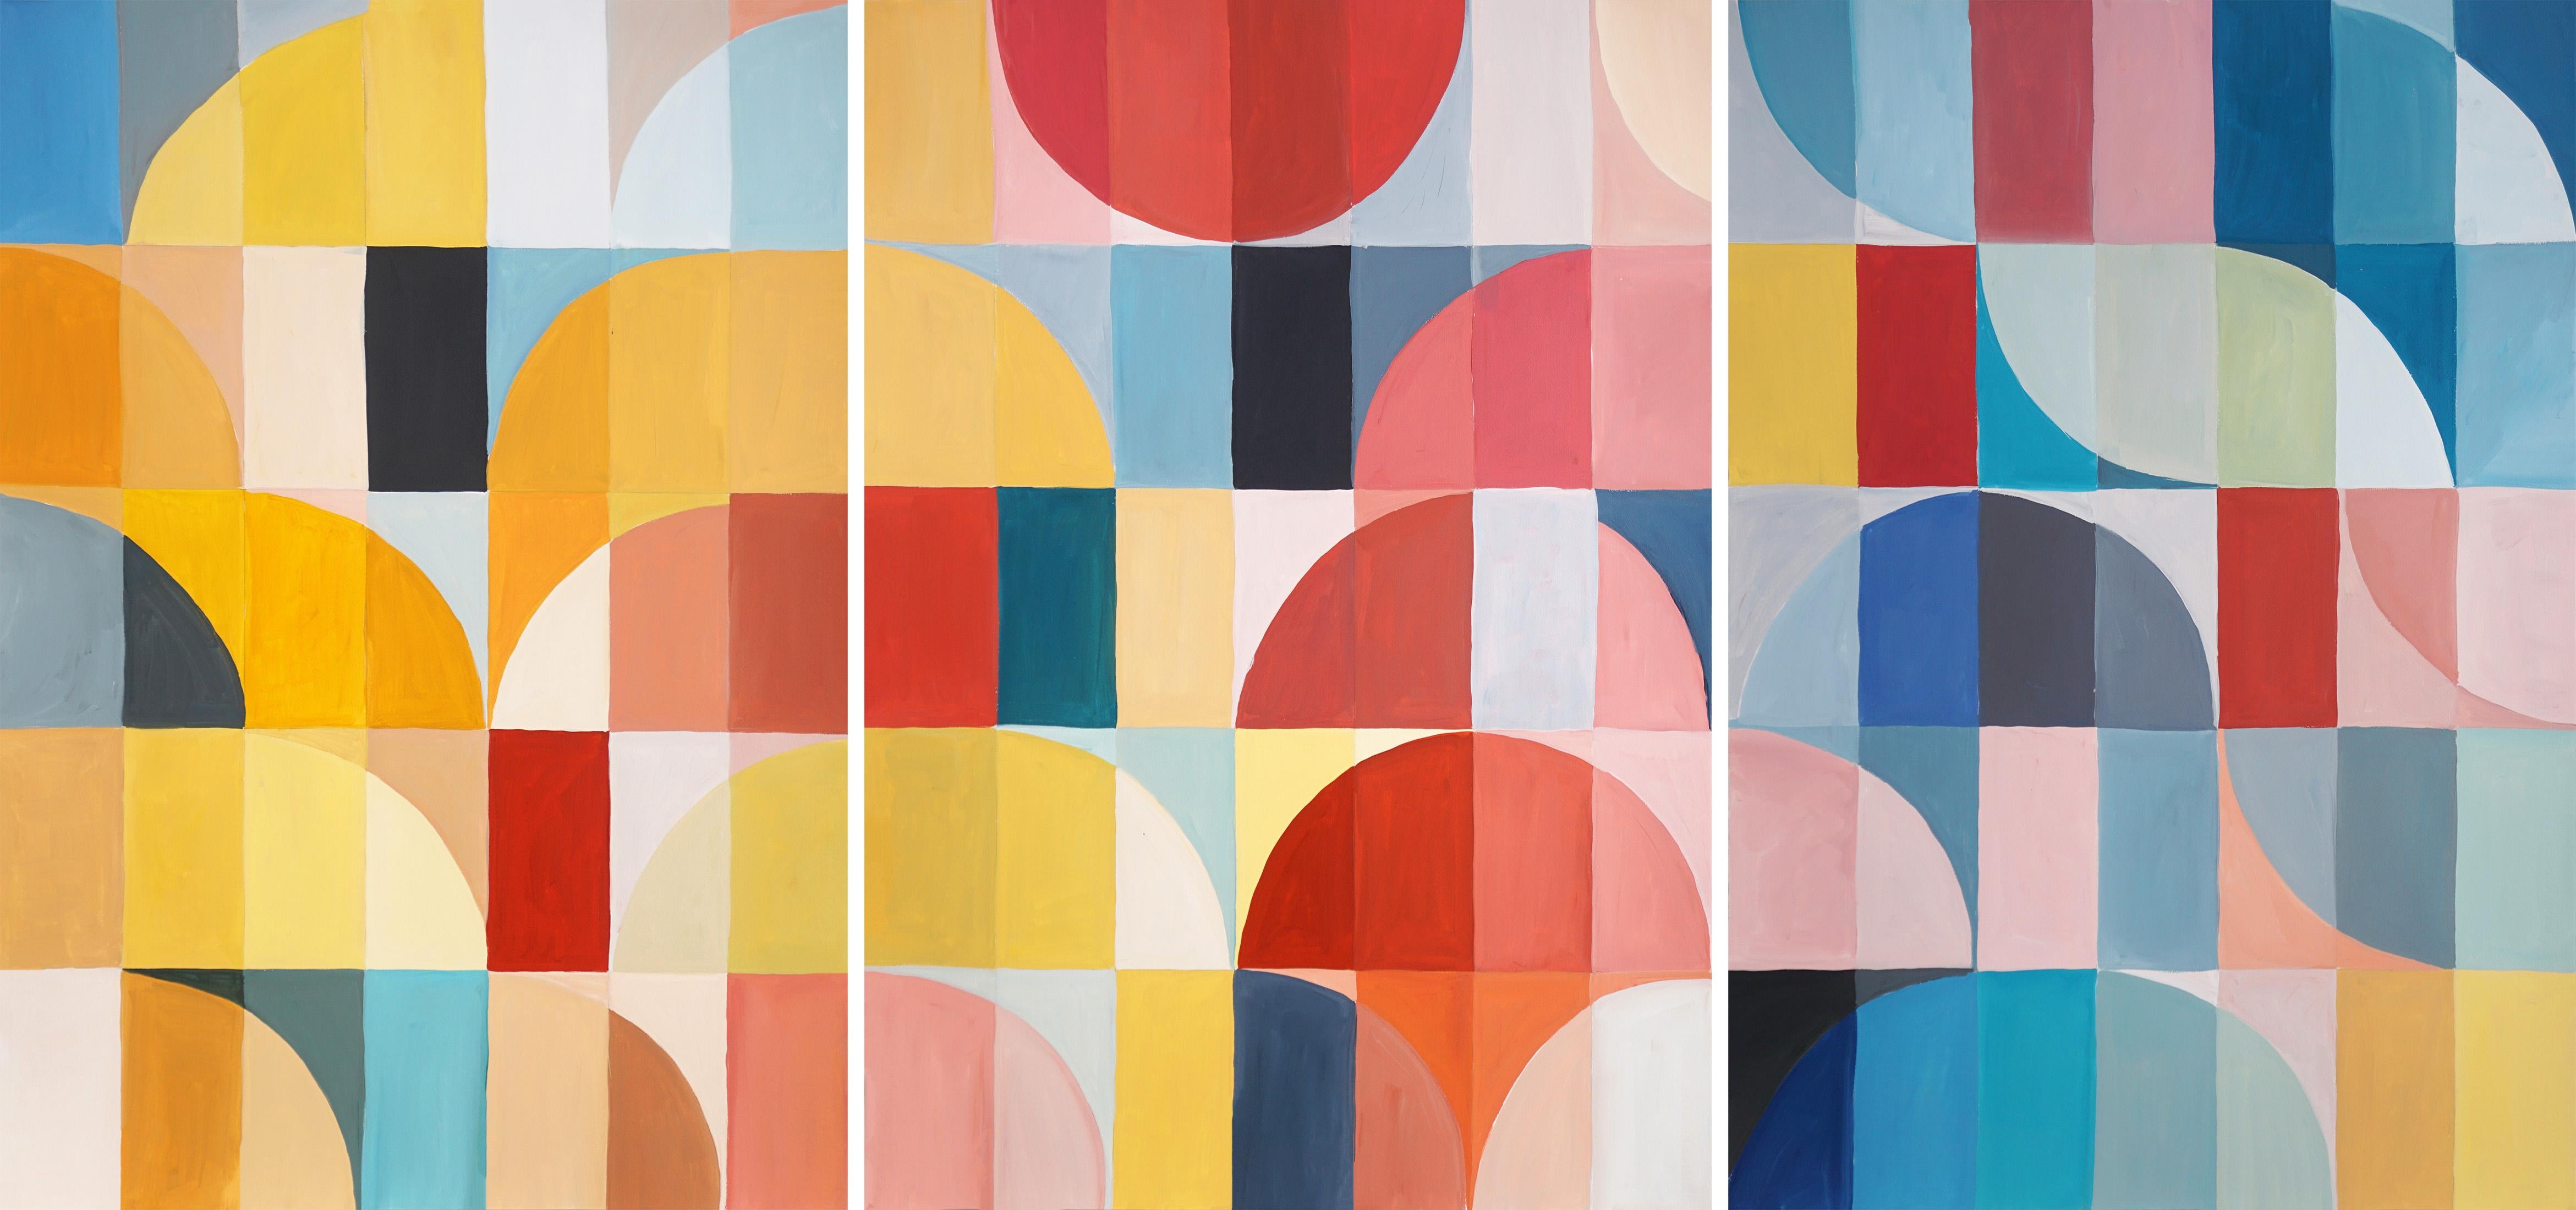 Natalia Roman Landscape Painting - Primary Tones Arcs & Curves, Yellow, Blue and Red Bauhaus Grid, Large Triptych